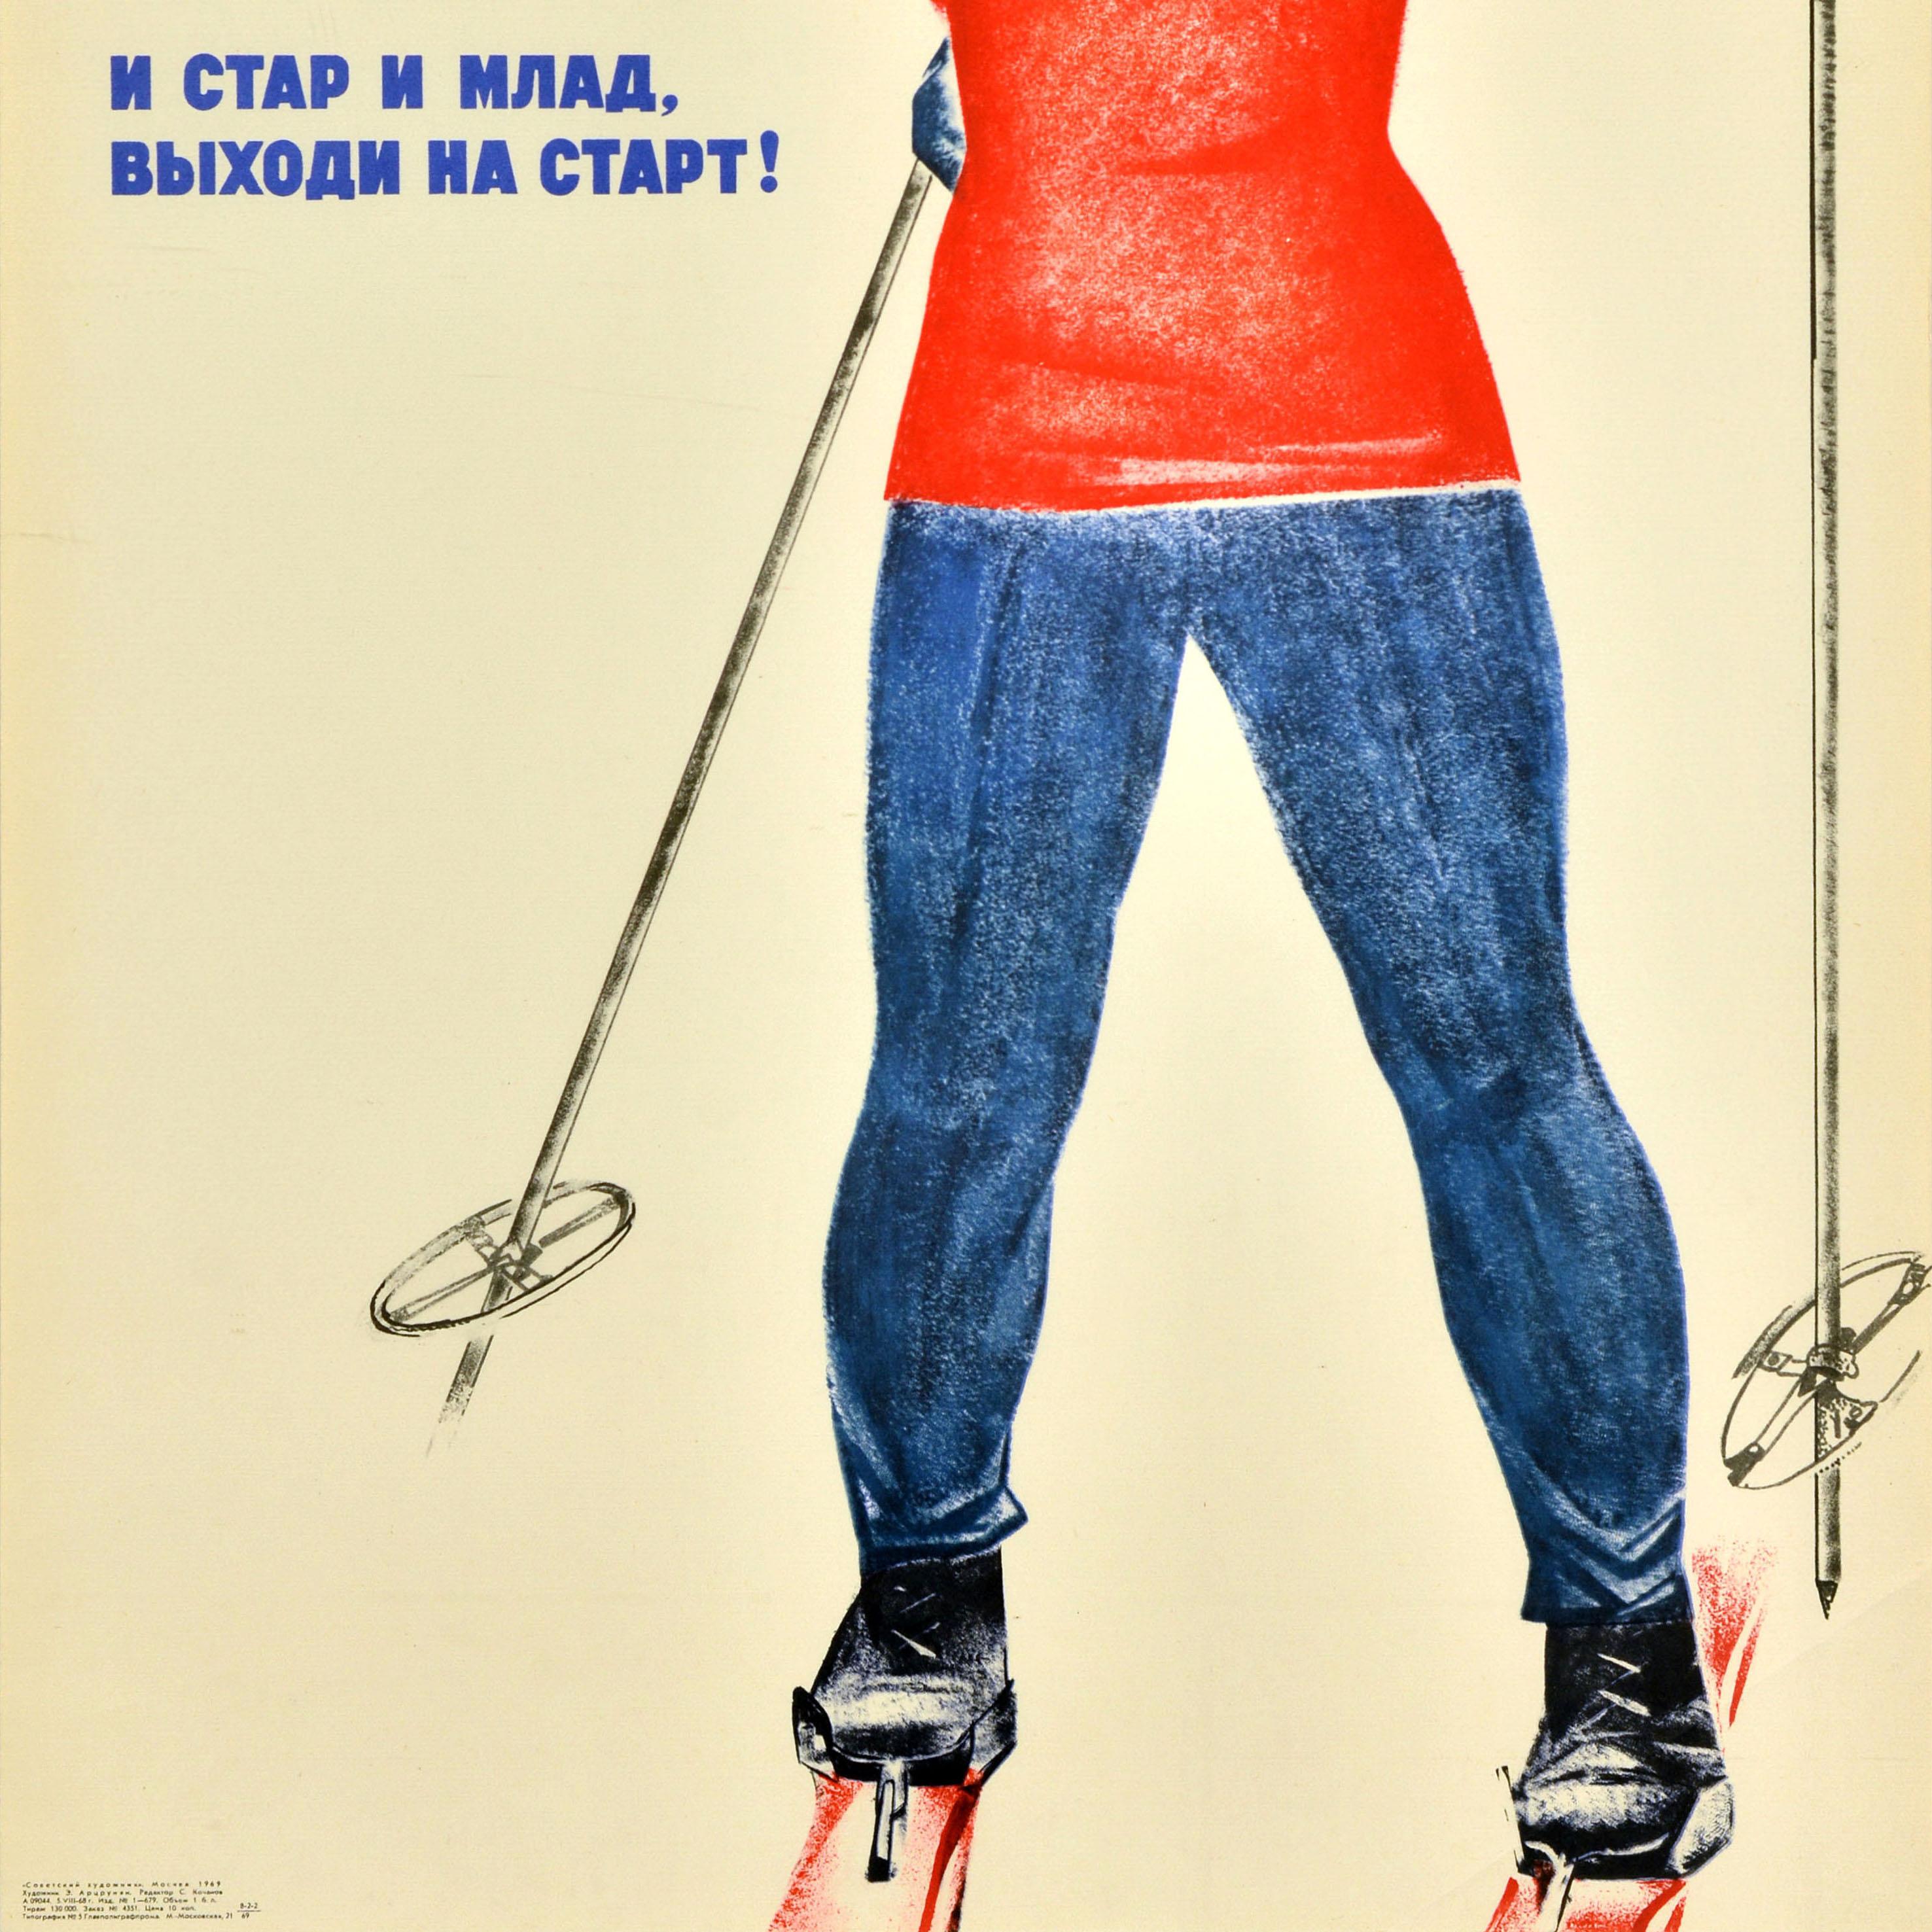 Original vintage Soviet winter sport poster featuring an illustration of people skiing down a snowy piste with a smiling lady on skis in the foreground encouraging the viewer to join them on the slopes, a shining red sun in the background and the